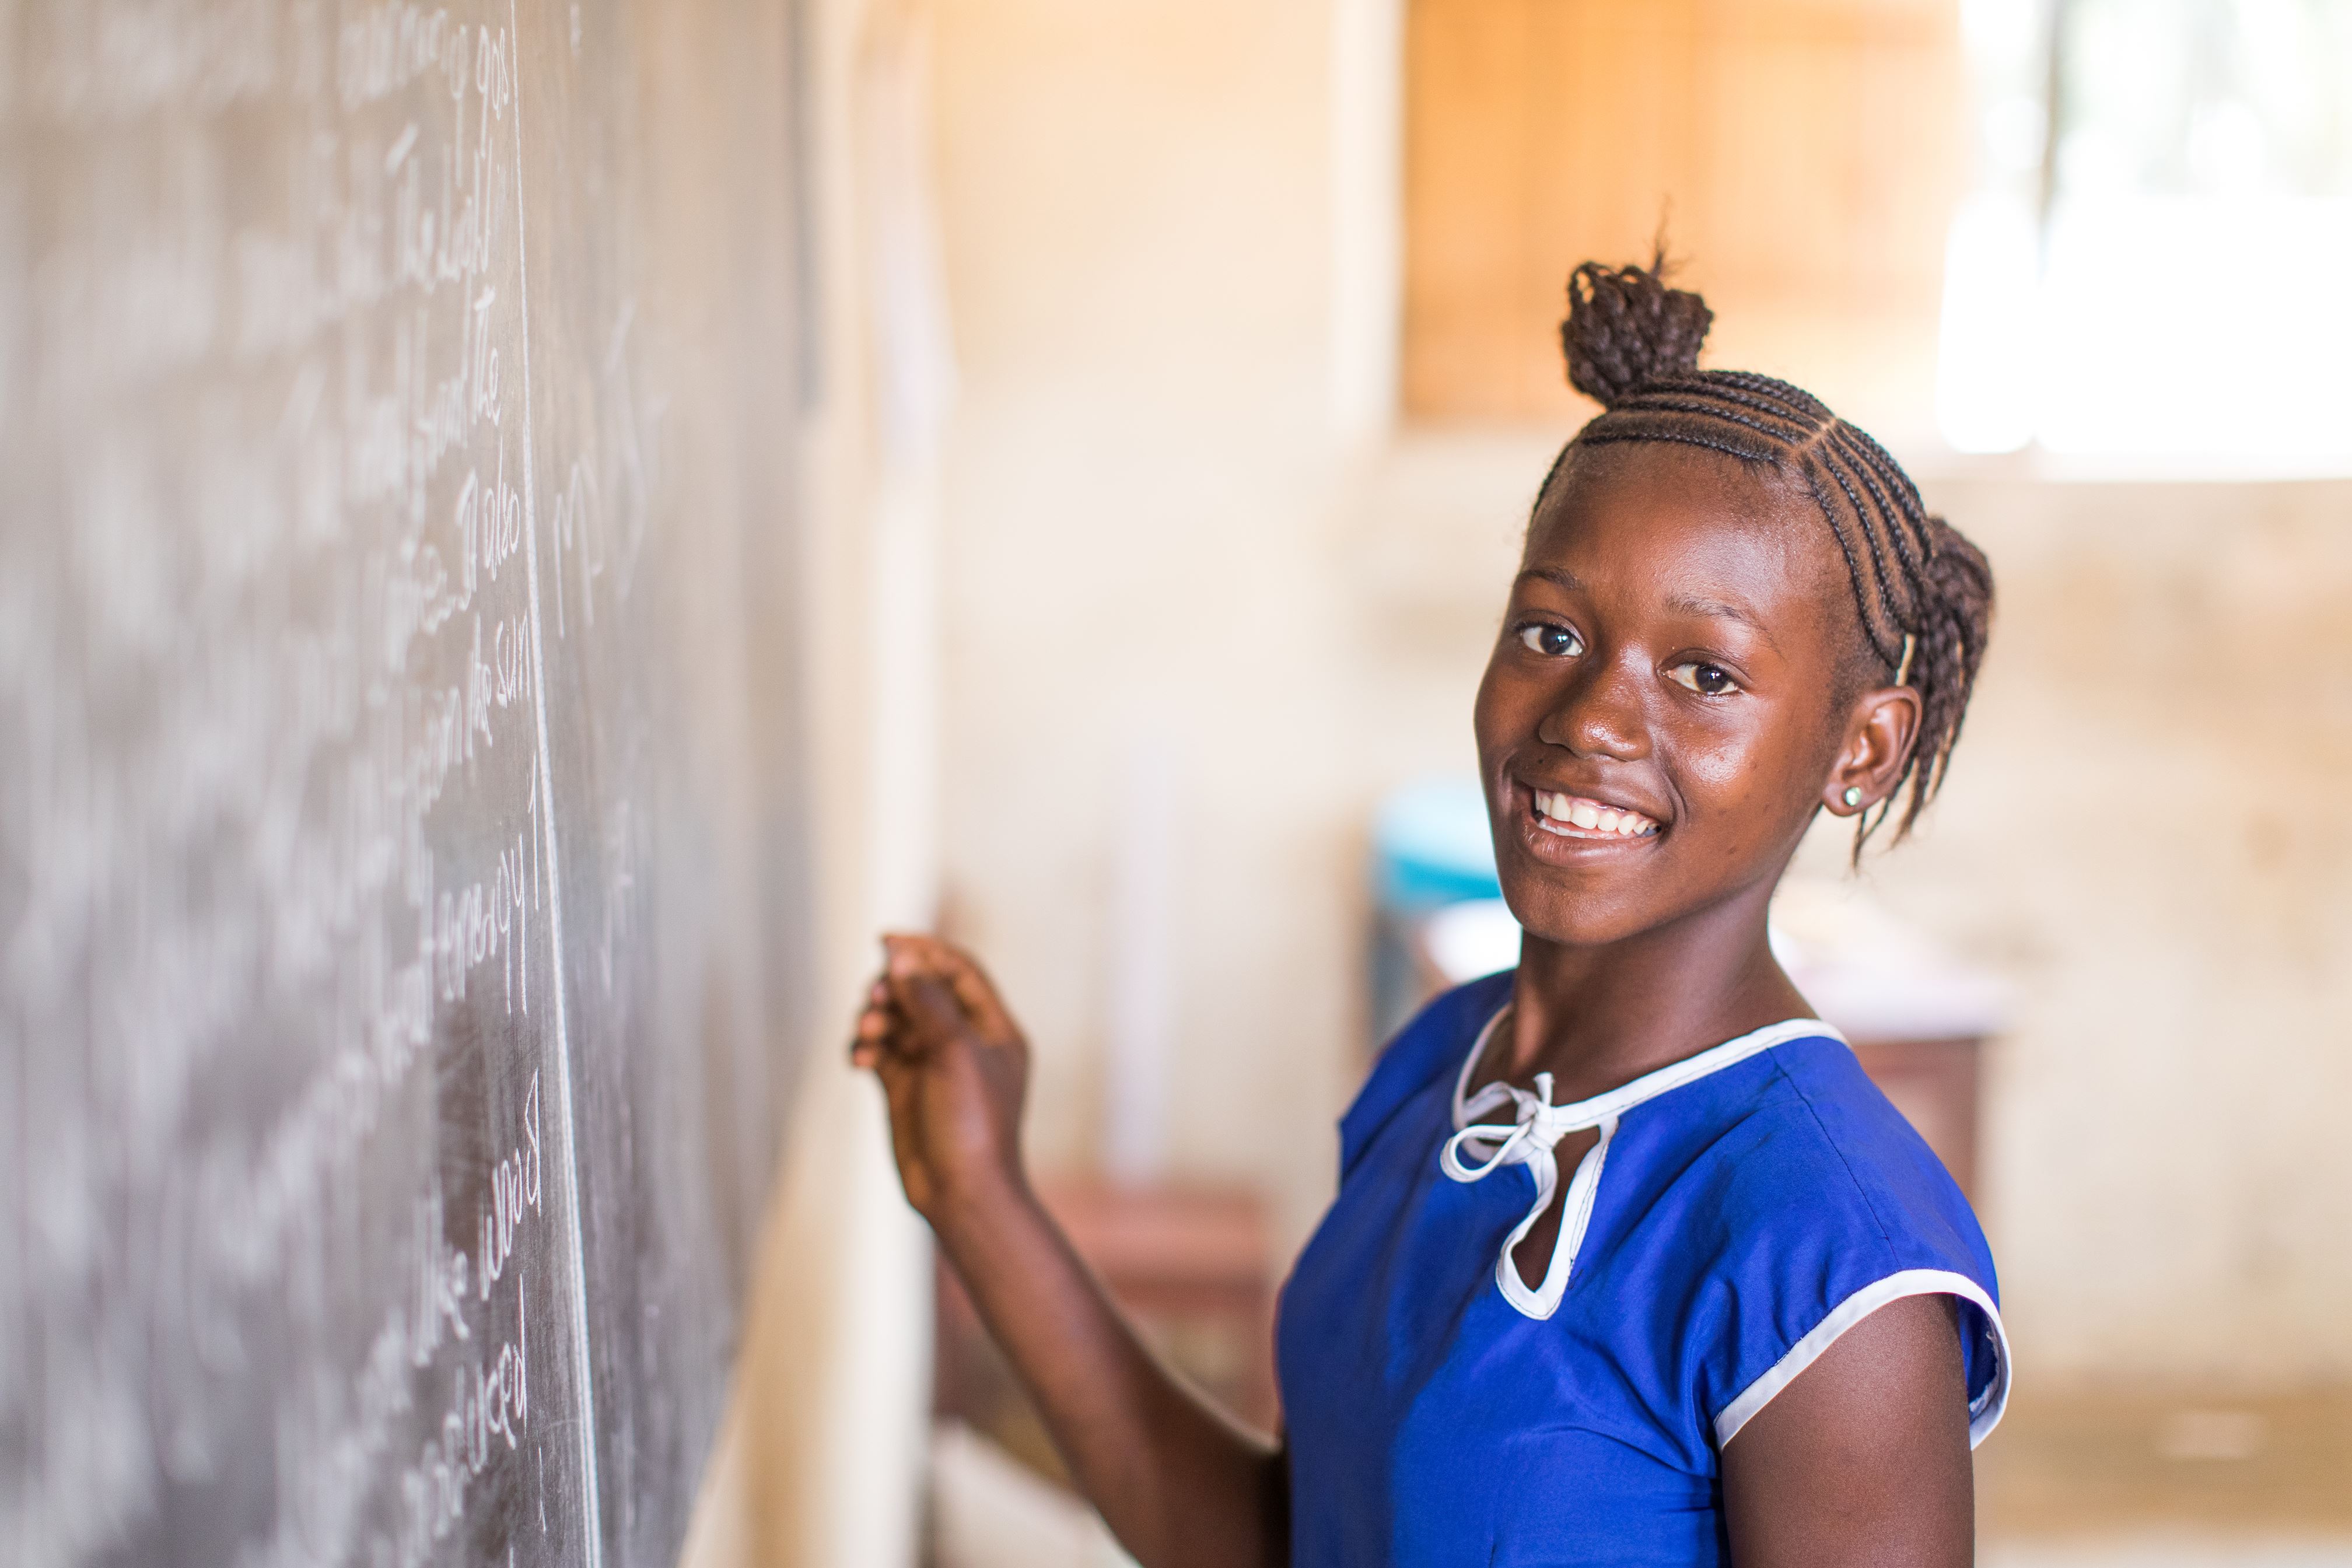 Child from Sierra Leone smiles at the camera, holding chalk up to a blackboard indoors